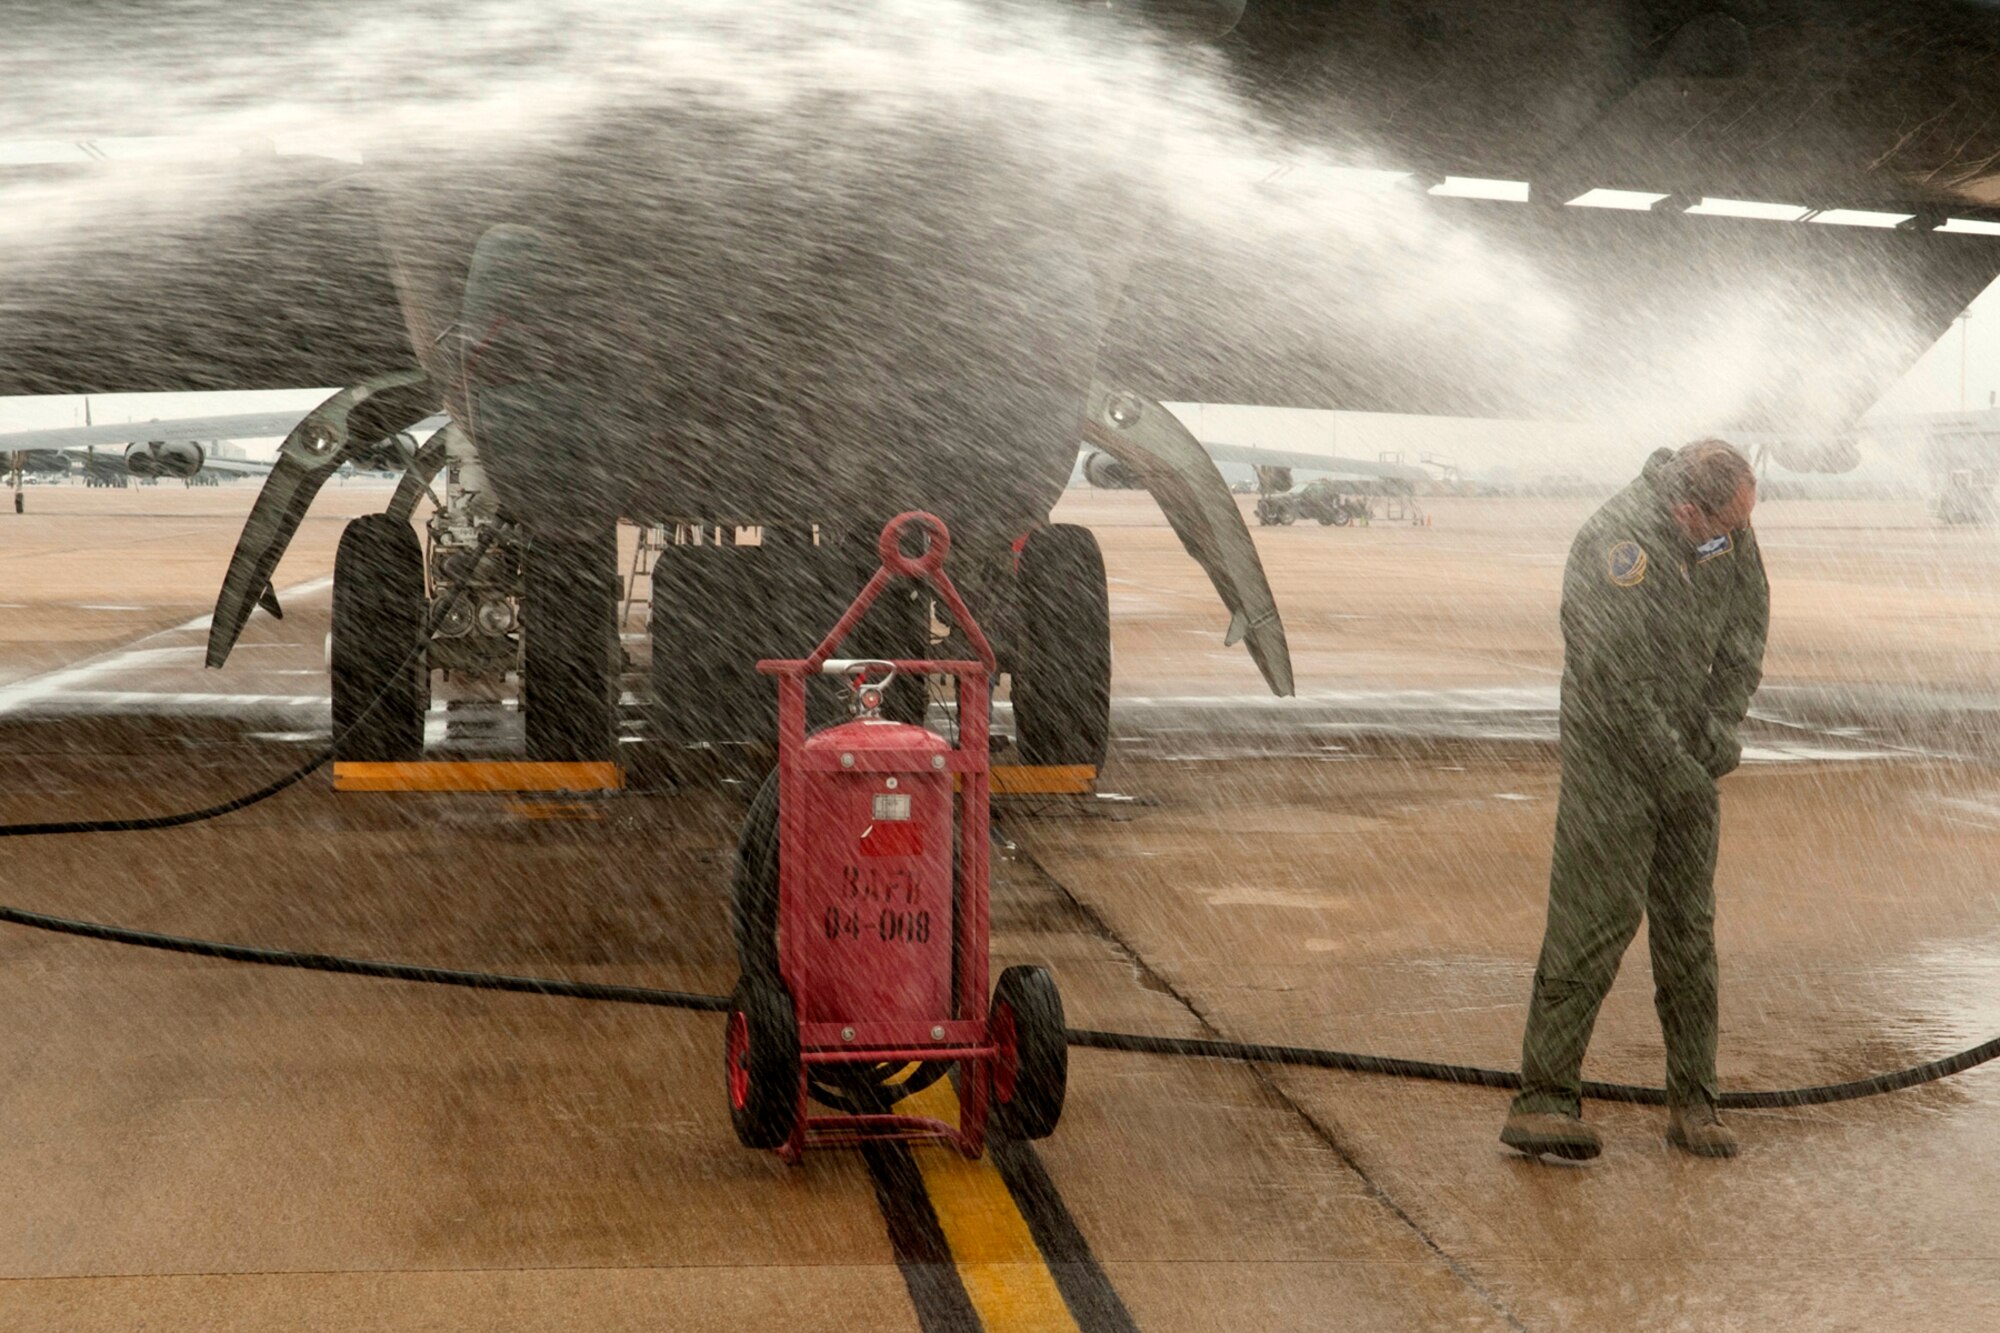 U.S. Air Force Brig. Gen. John Mooney III, 307th Bomb Wing commander, gets hosed down after returning from his last sortie with the 93rd Bomb Squadron, Barksdale Air Force Base, La., Feb. 10, 2012. Mooney relinquished command of the 307th BW on Feb. 11, 2012, and will assume the duties as Inspector General, Air Force Reserve Command, Robins Air Force Base, Ga. (U.S. Air Force photo by Master Sgt. Greg Steele/Released) 